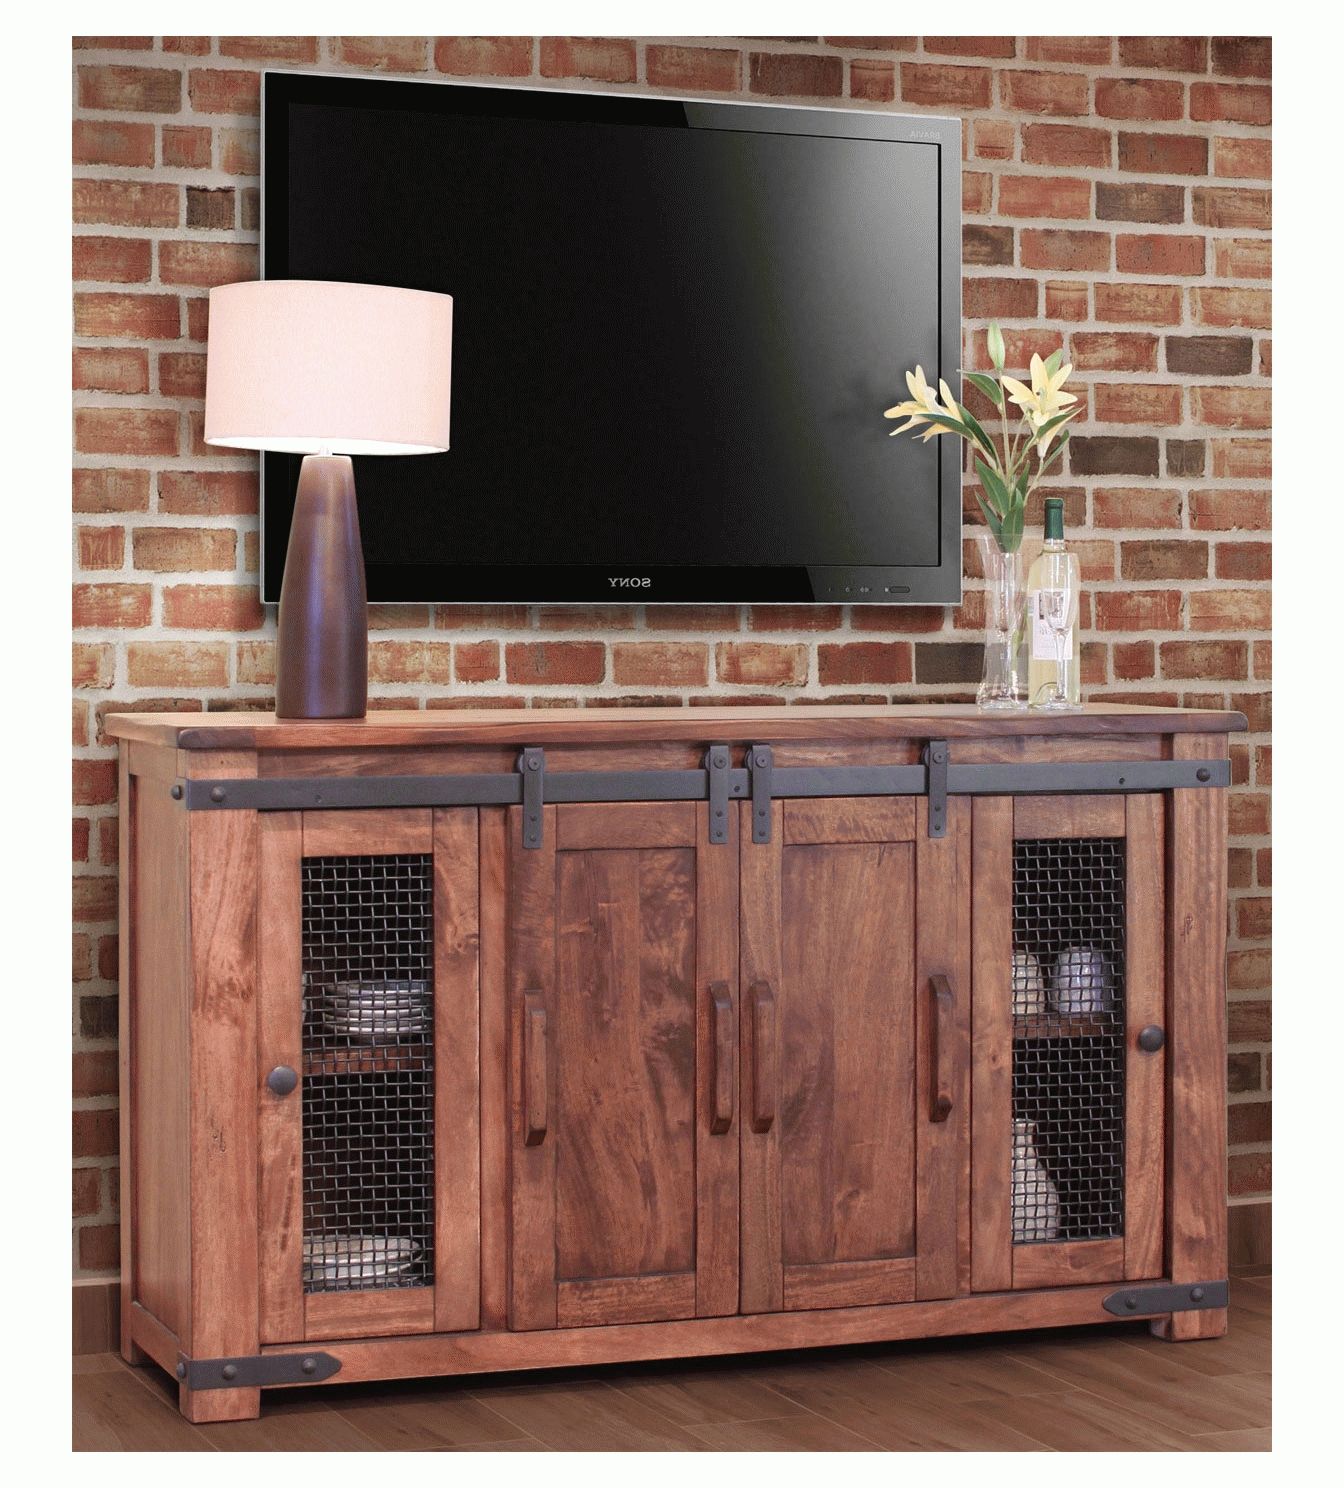 White Rustic Corner Tv Stand With Fireplacerustic Tv Stands Pertaining To Rustic Corner Tv Stands (Gallery 19 of 20)